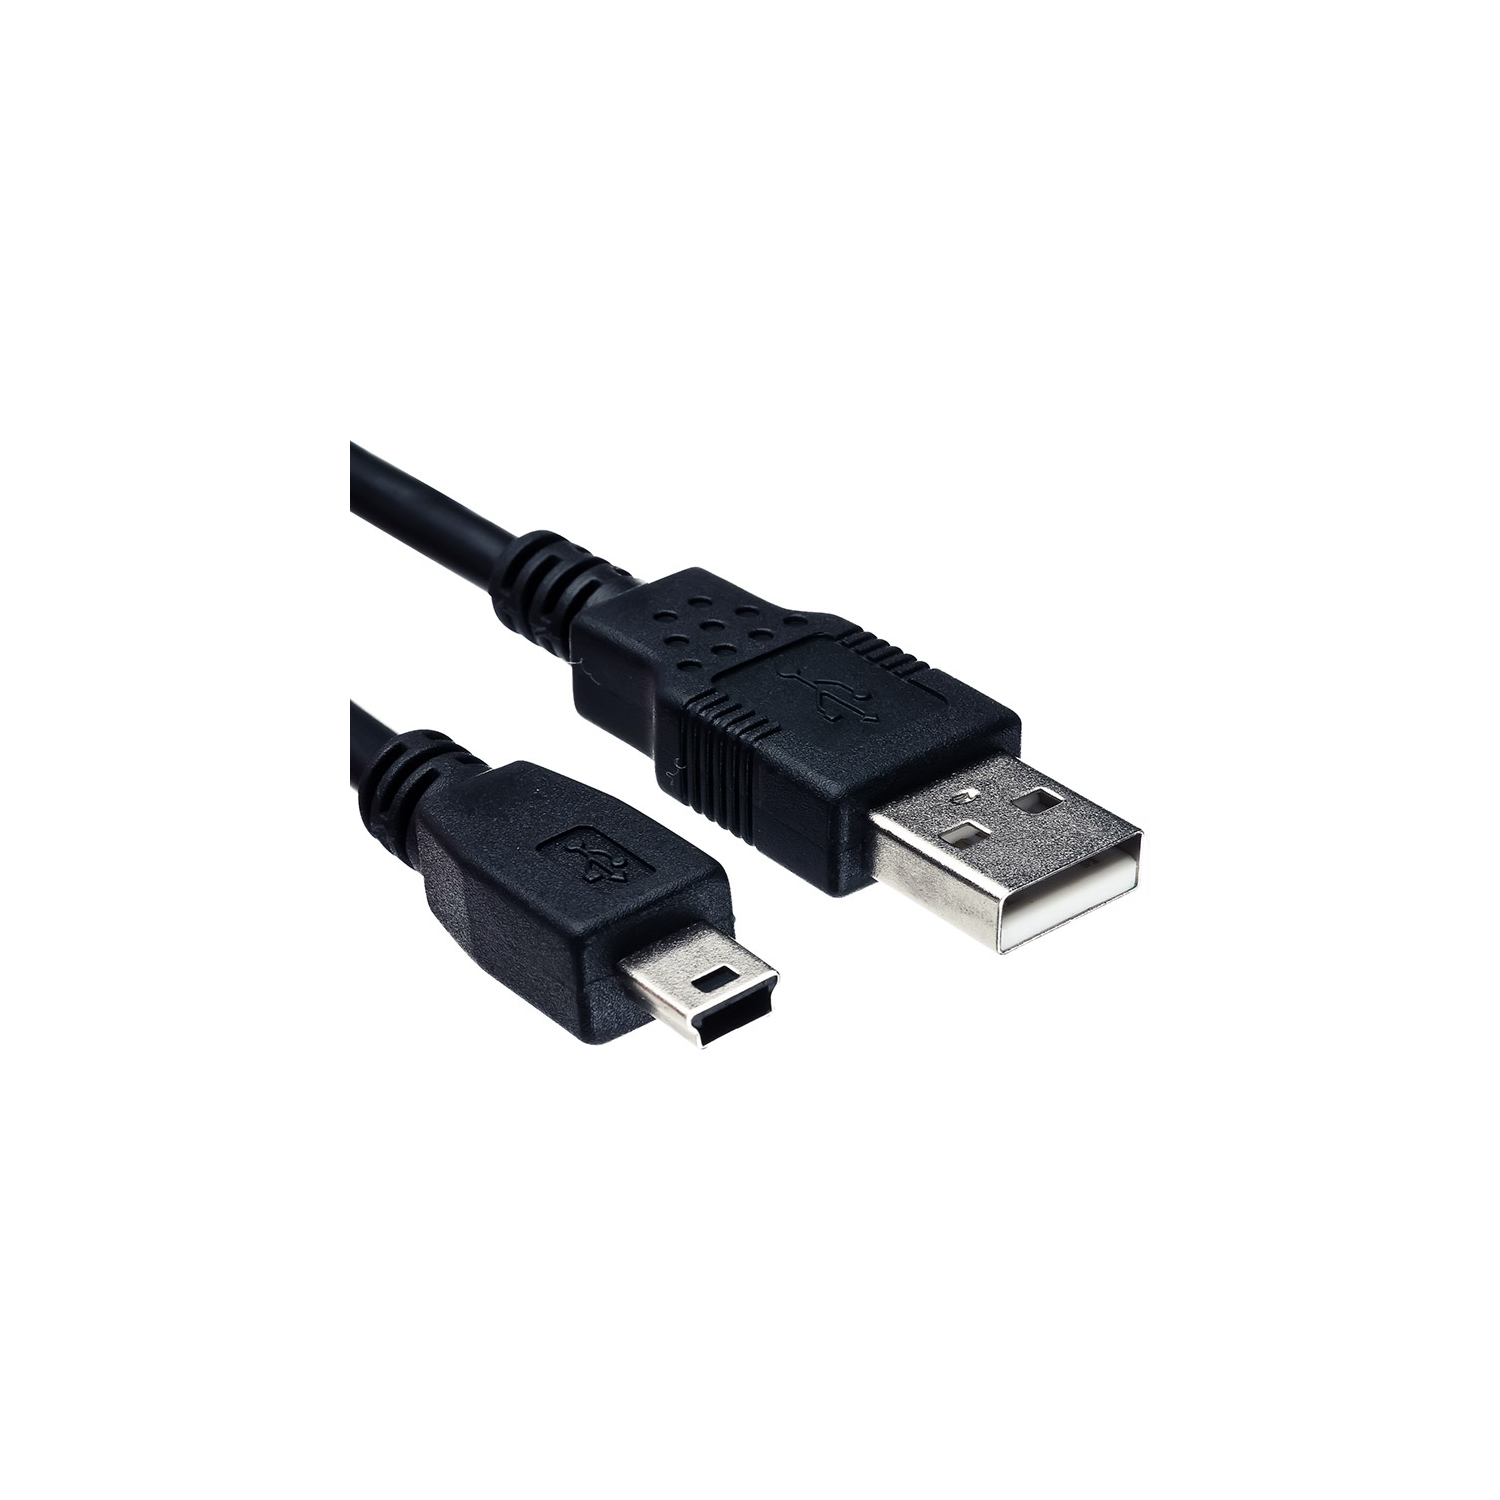 USB 2.0A Male to Mini USB 5 Pin B Data Charging Cable Cord Adapter 3Ft/1M, Black